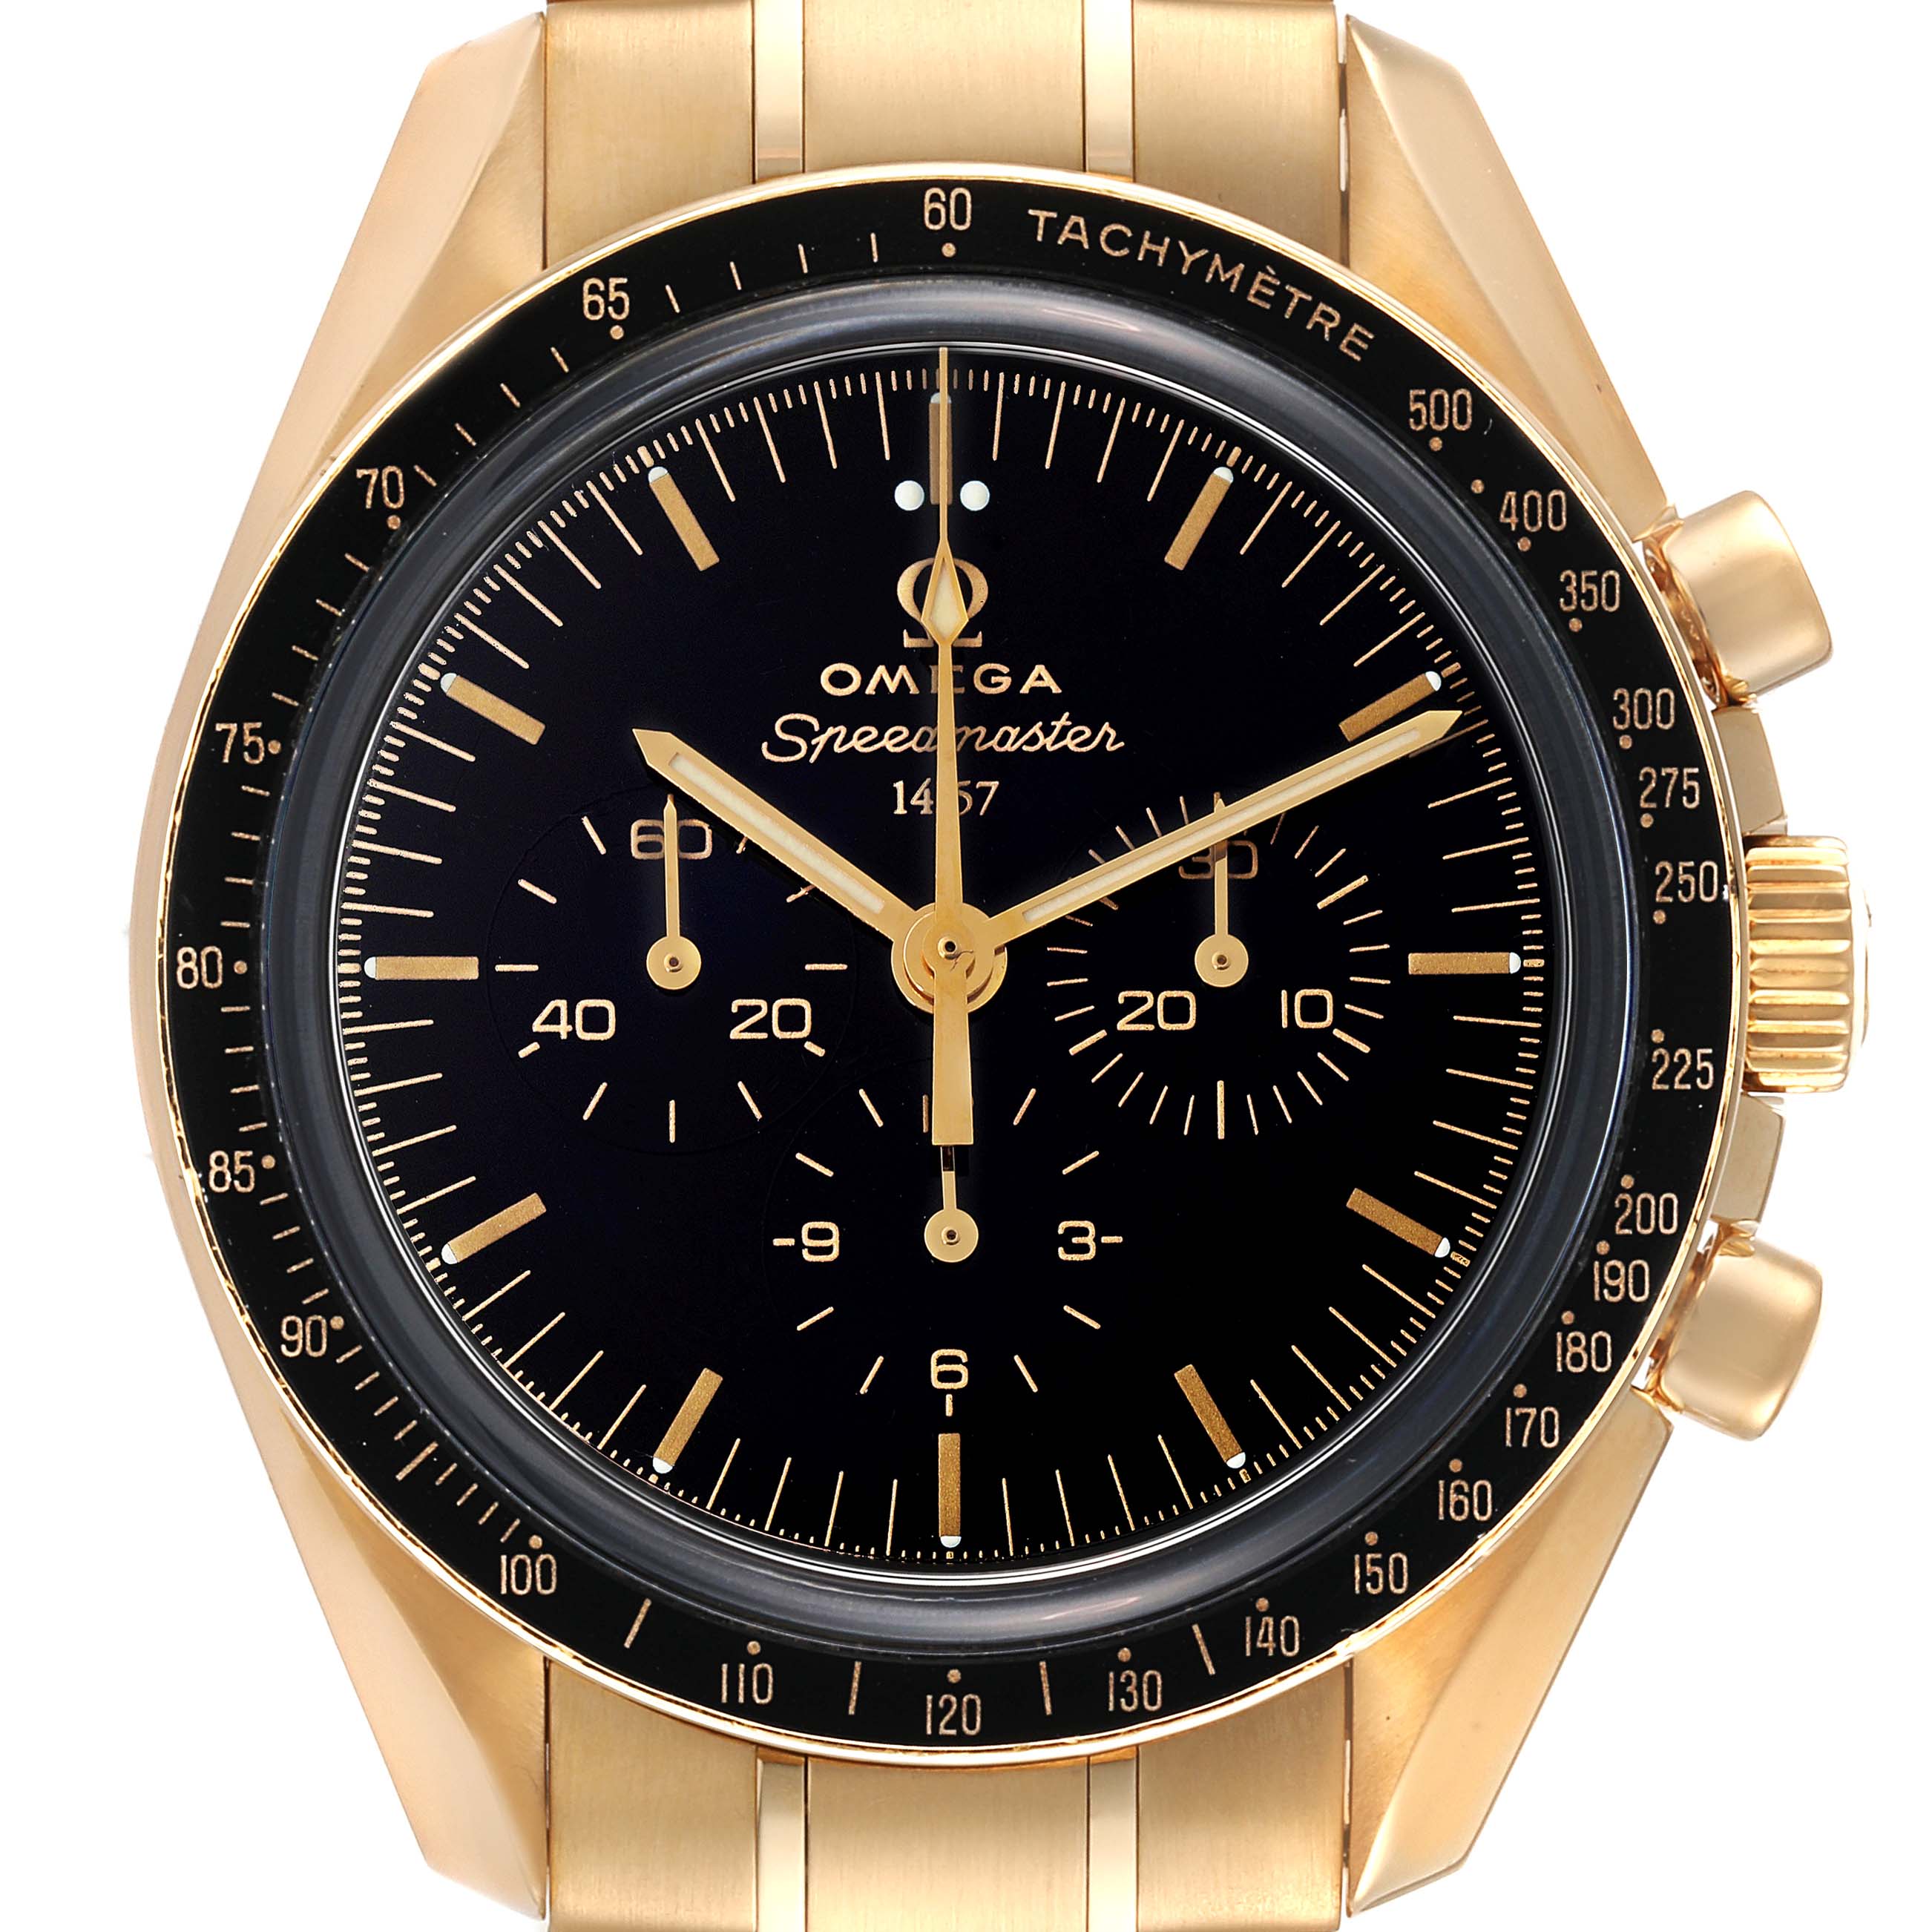 Omega Speedmaster 50th Anniversary Yellow Gold Limited Edition Mens Watch  311.63.42.50.01.002